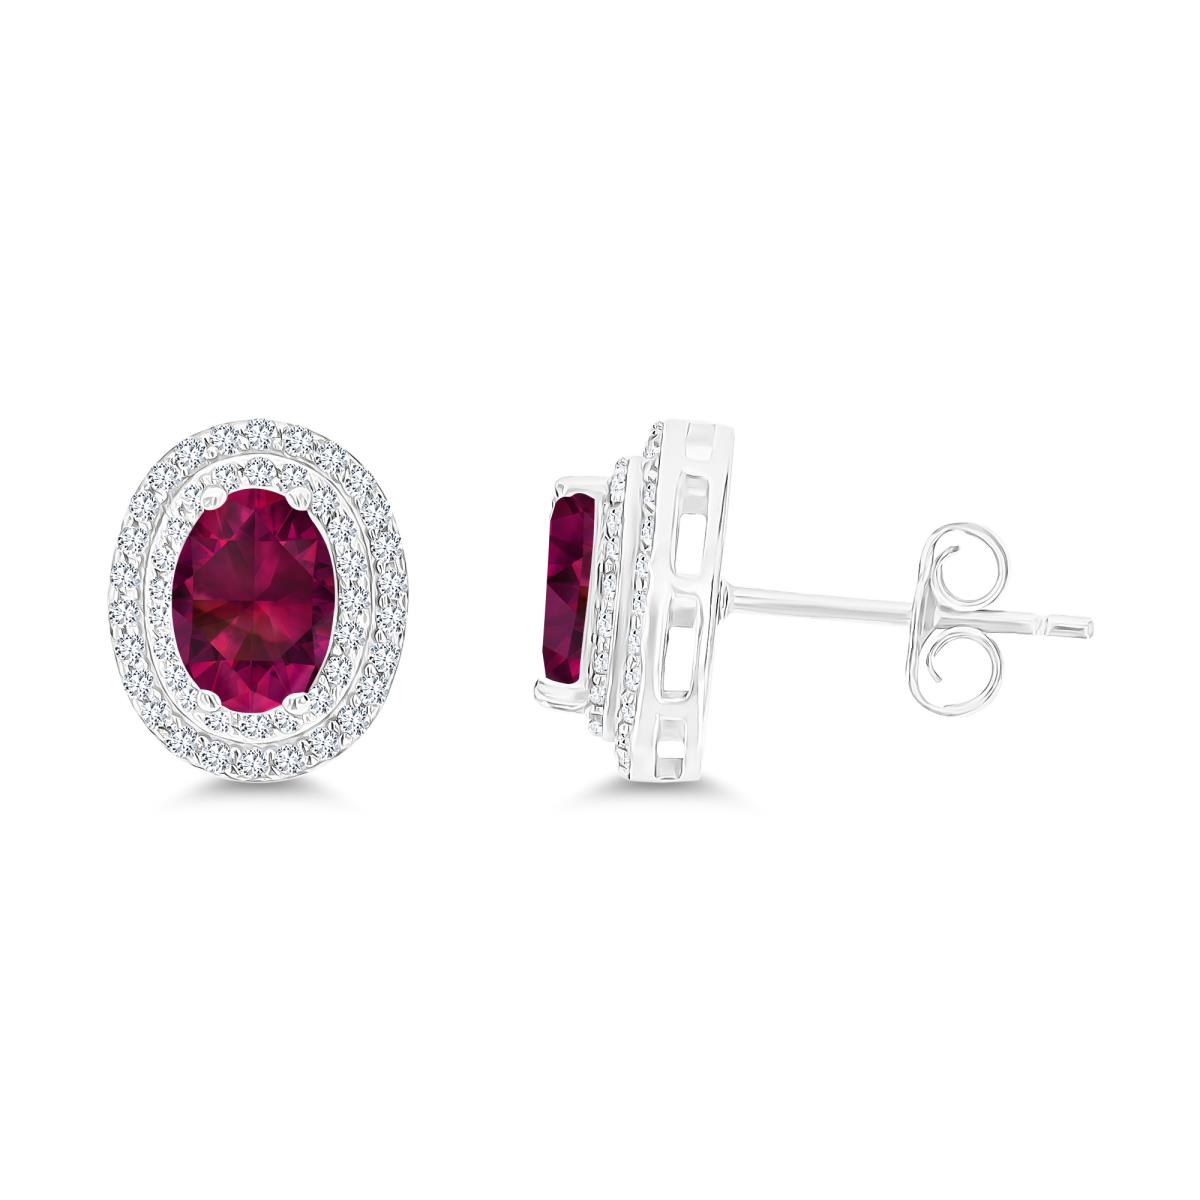 Sterling Silver Rhodium 7x5mm Oval Created Ruby & Cr White Sapphire Halo Earrings